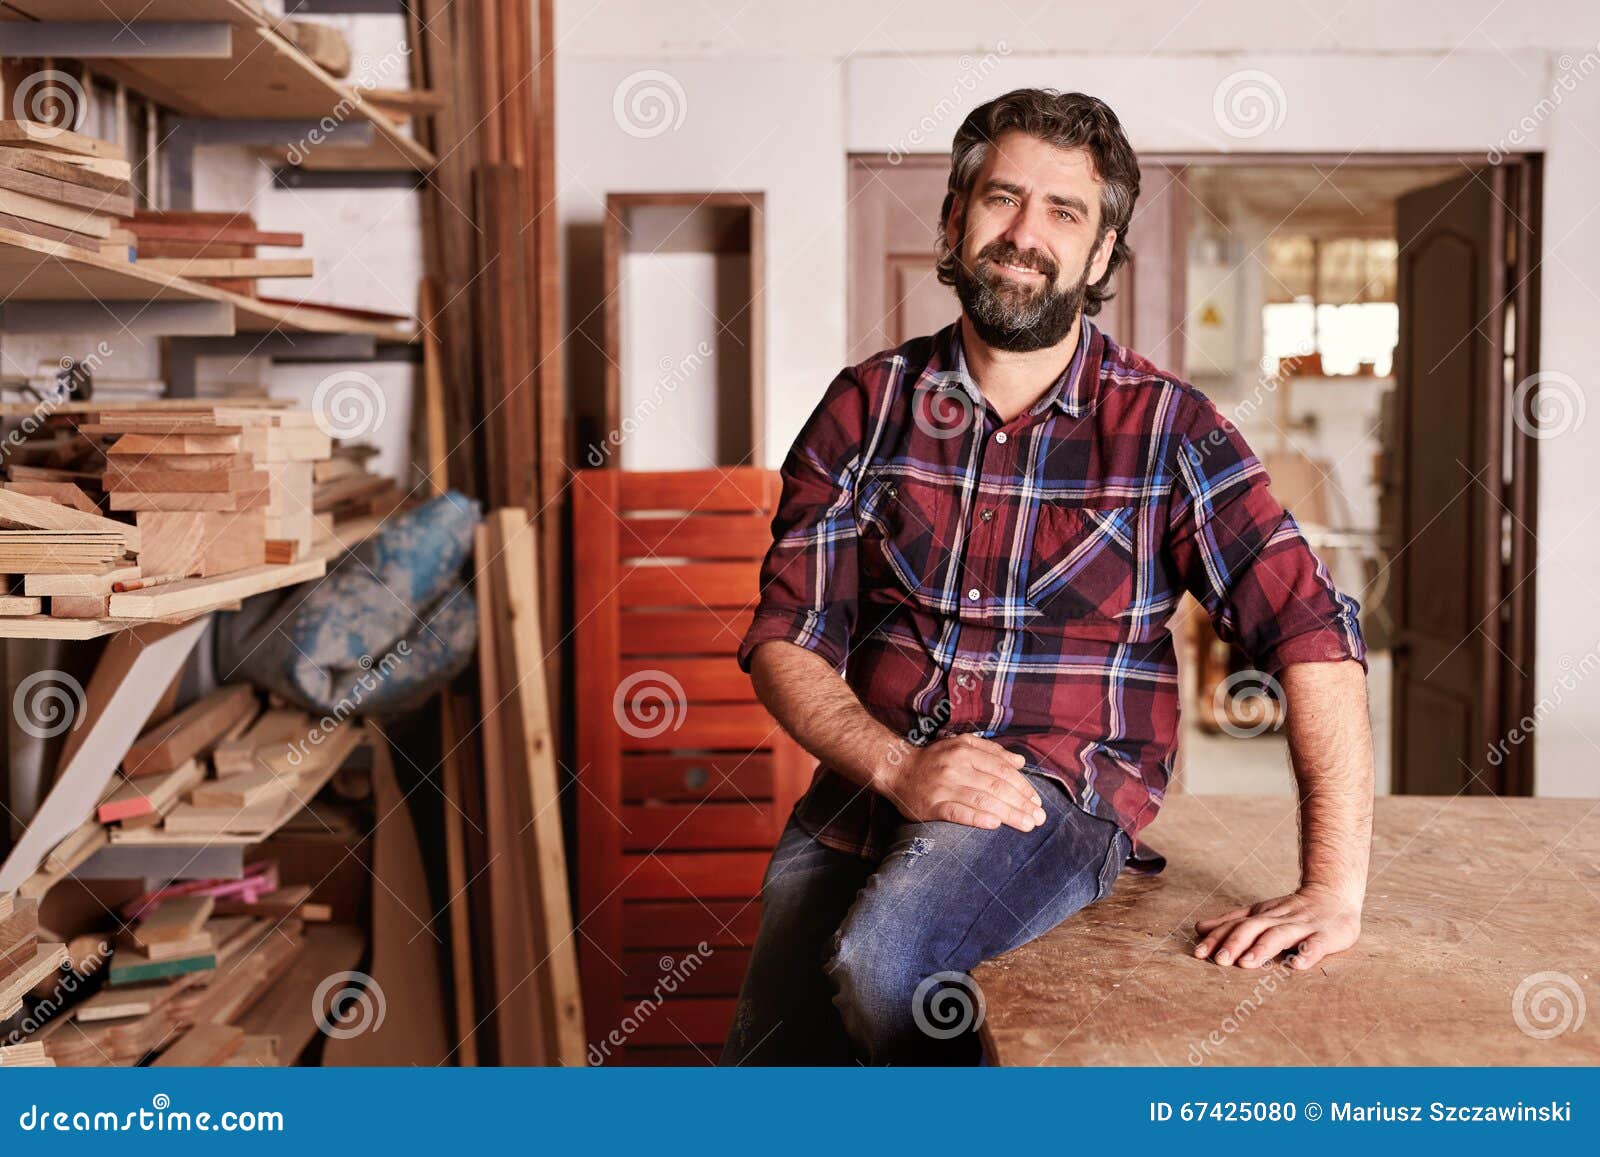 craftsman sitting in his woodwork studio for a portrait, with shelves 